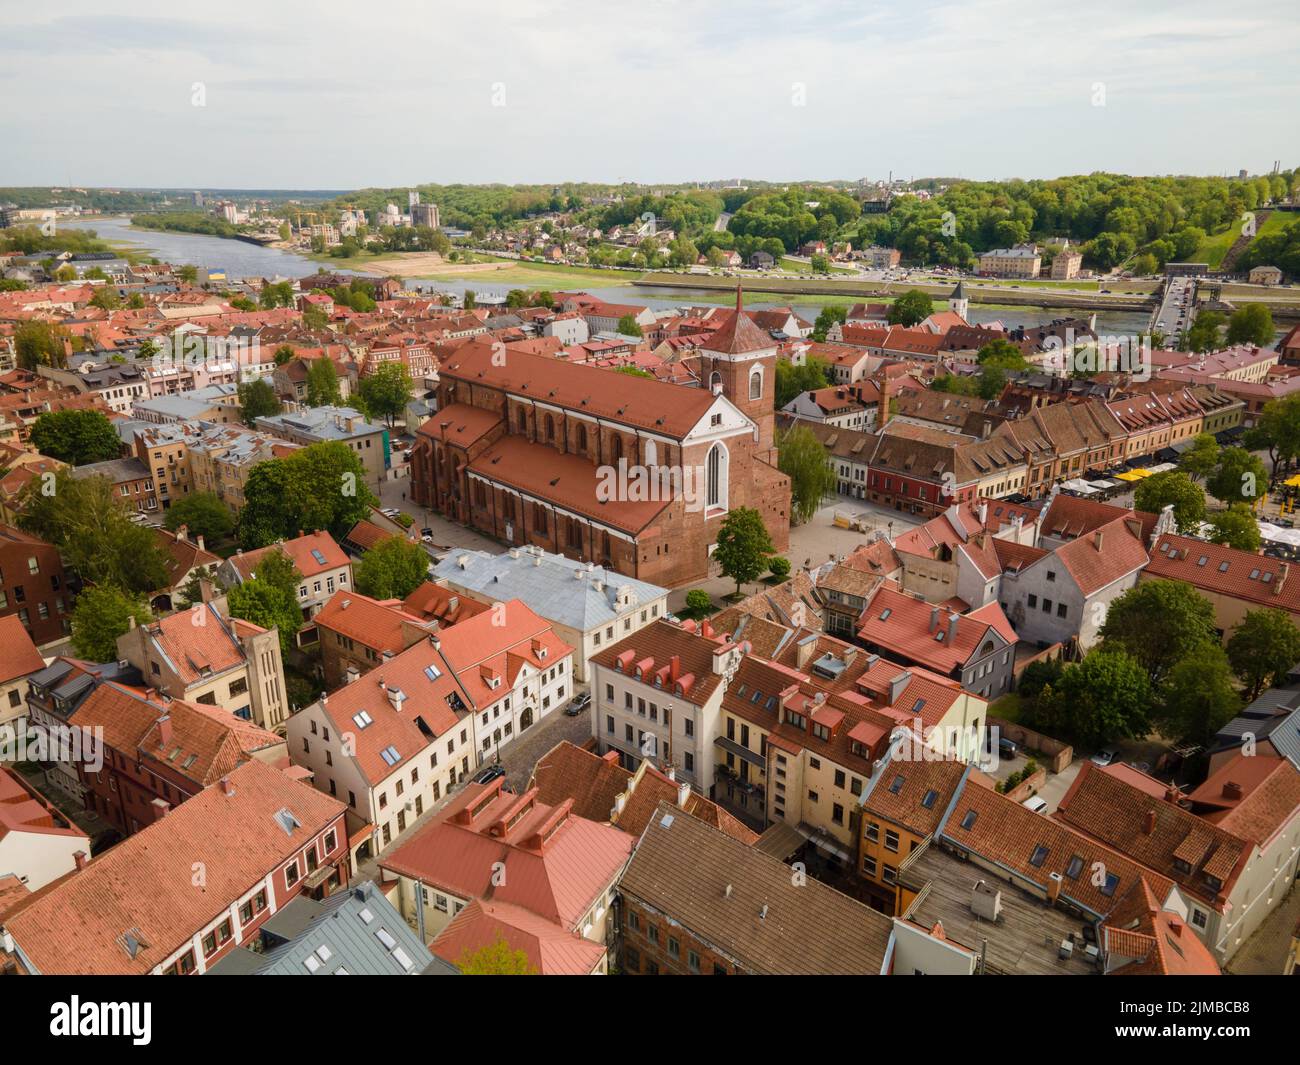 A high-angle shot of the Cathedral Basilica in Kaunas, Lithuania with other buildings around Stock Photo